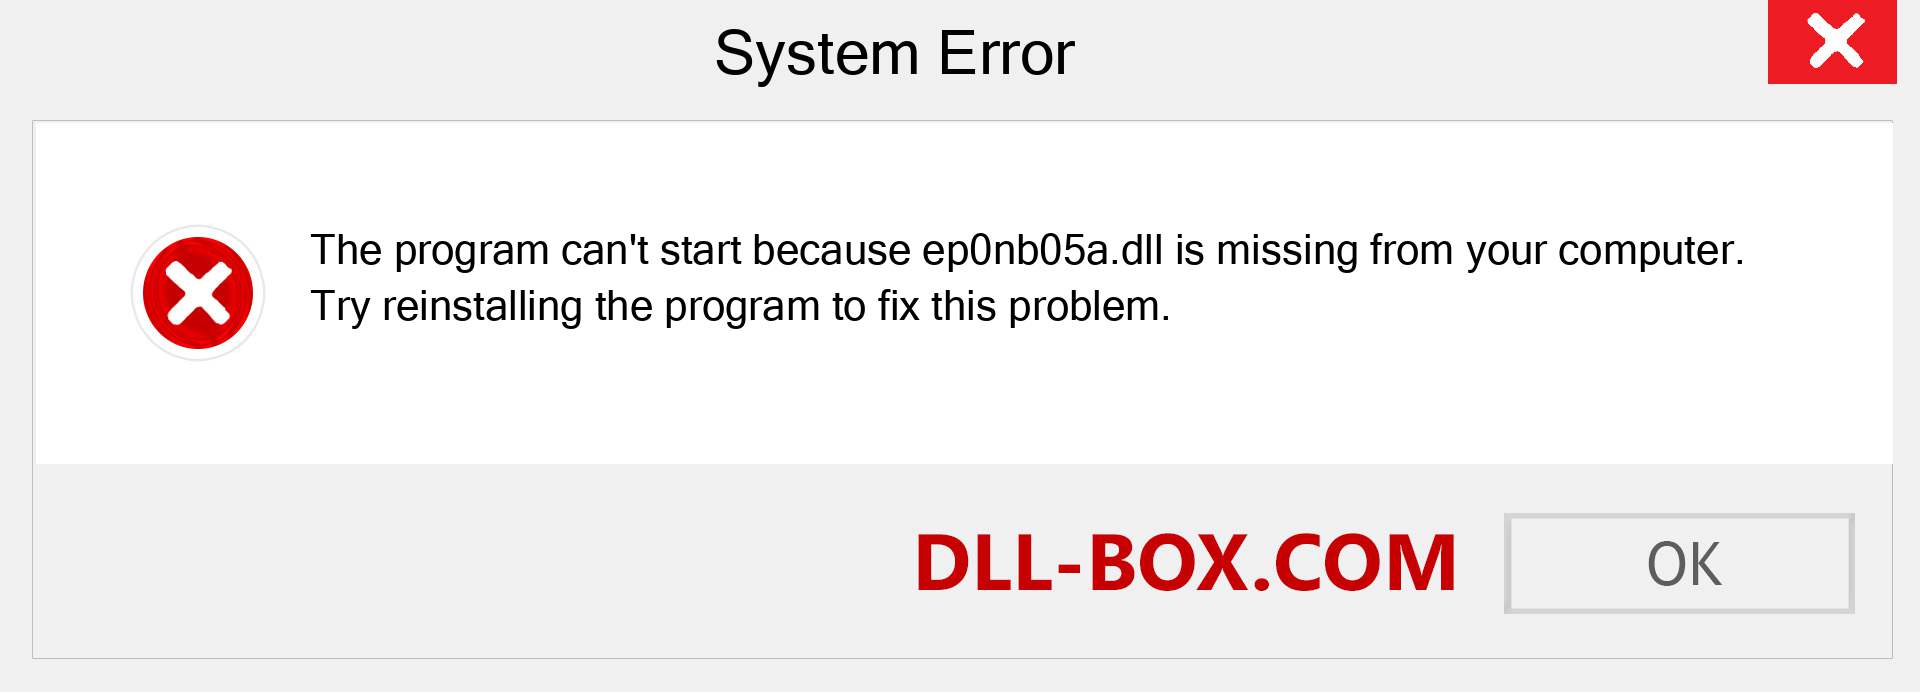  ep0nb05a.dll file is missing?. Download for Windows 7, 8, 10 - Fix  ep0nb05a dll Missing Error on Windows, photos, images